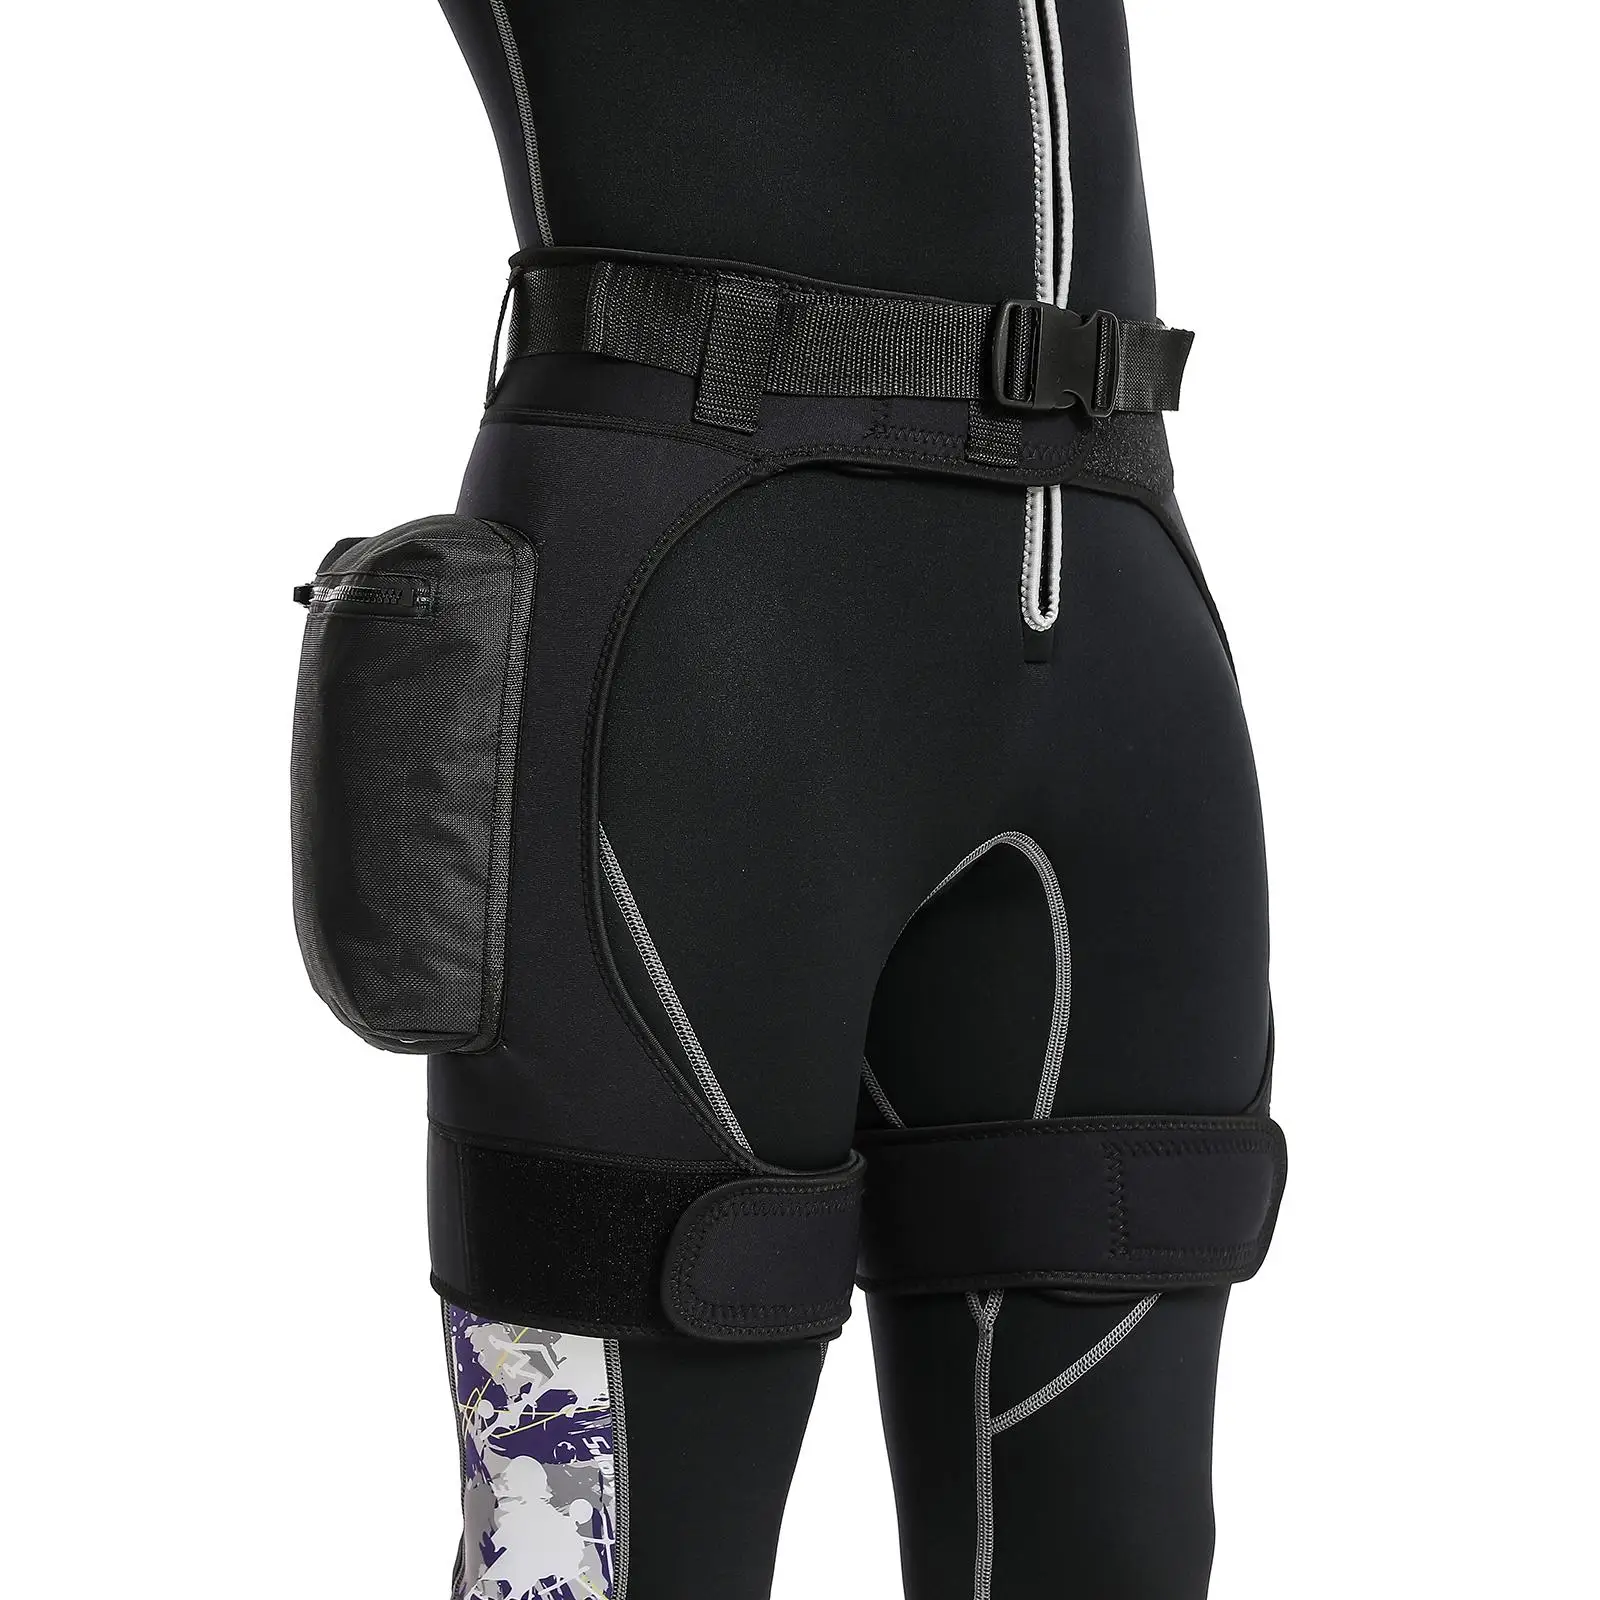 Diving  Snorkeling Swimming Weight-bearing Neoprene Pants with 2 Pockets